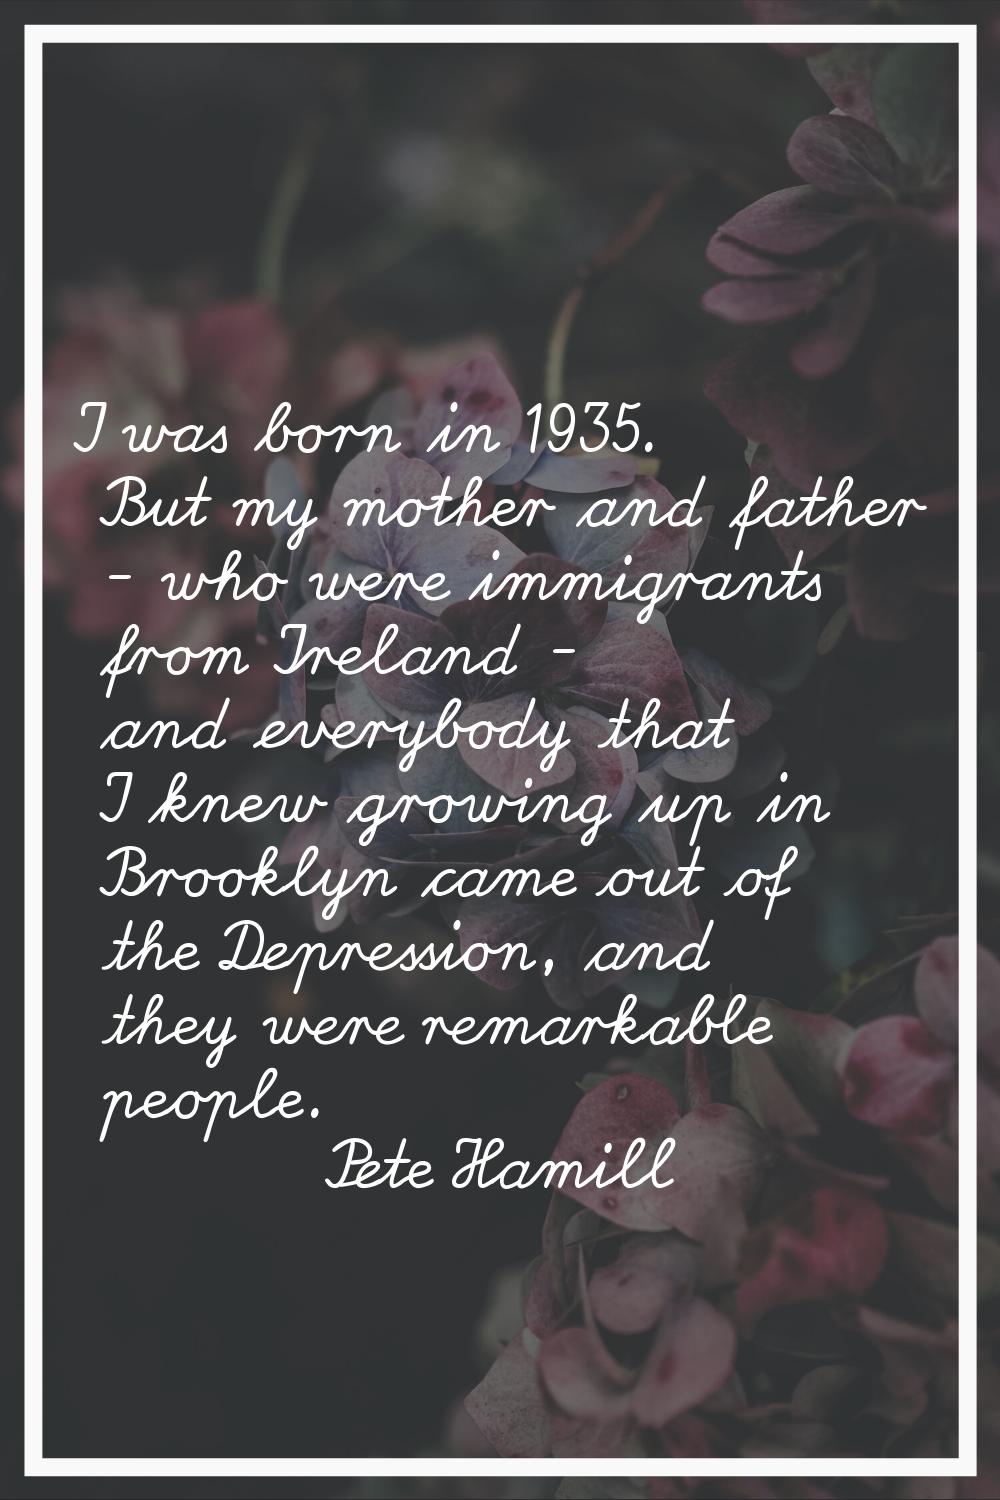 I was born in 1935. But my mother and father - who were immigrants from Ireland - and everybody tha